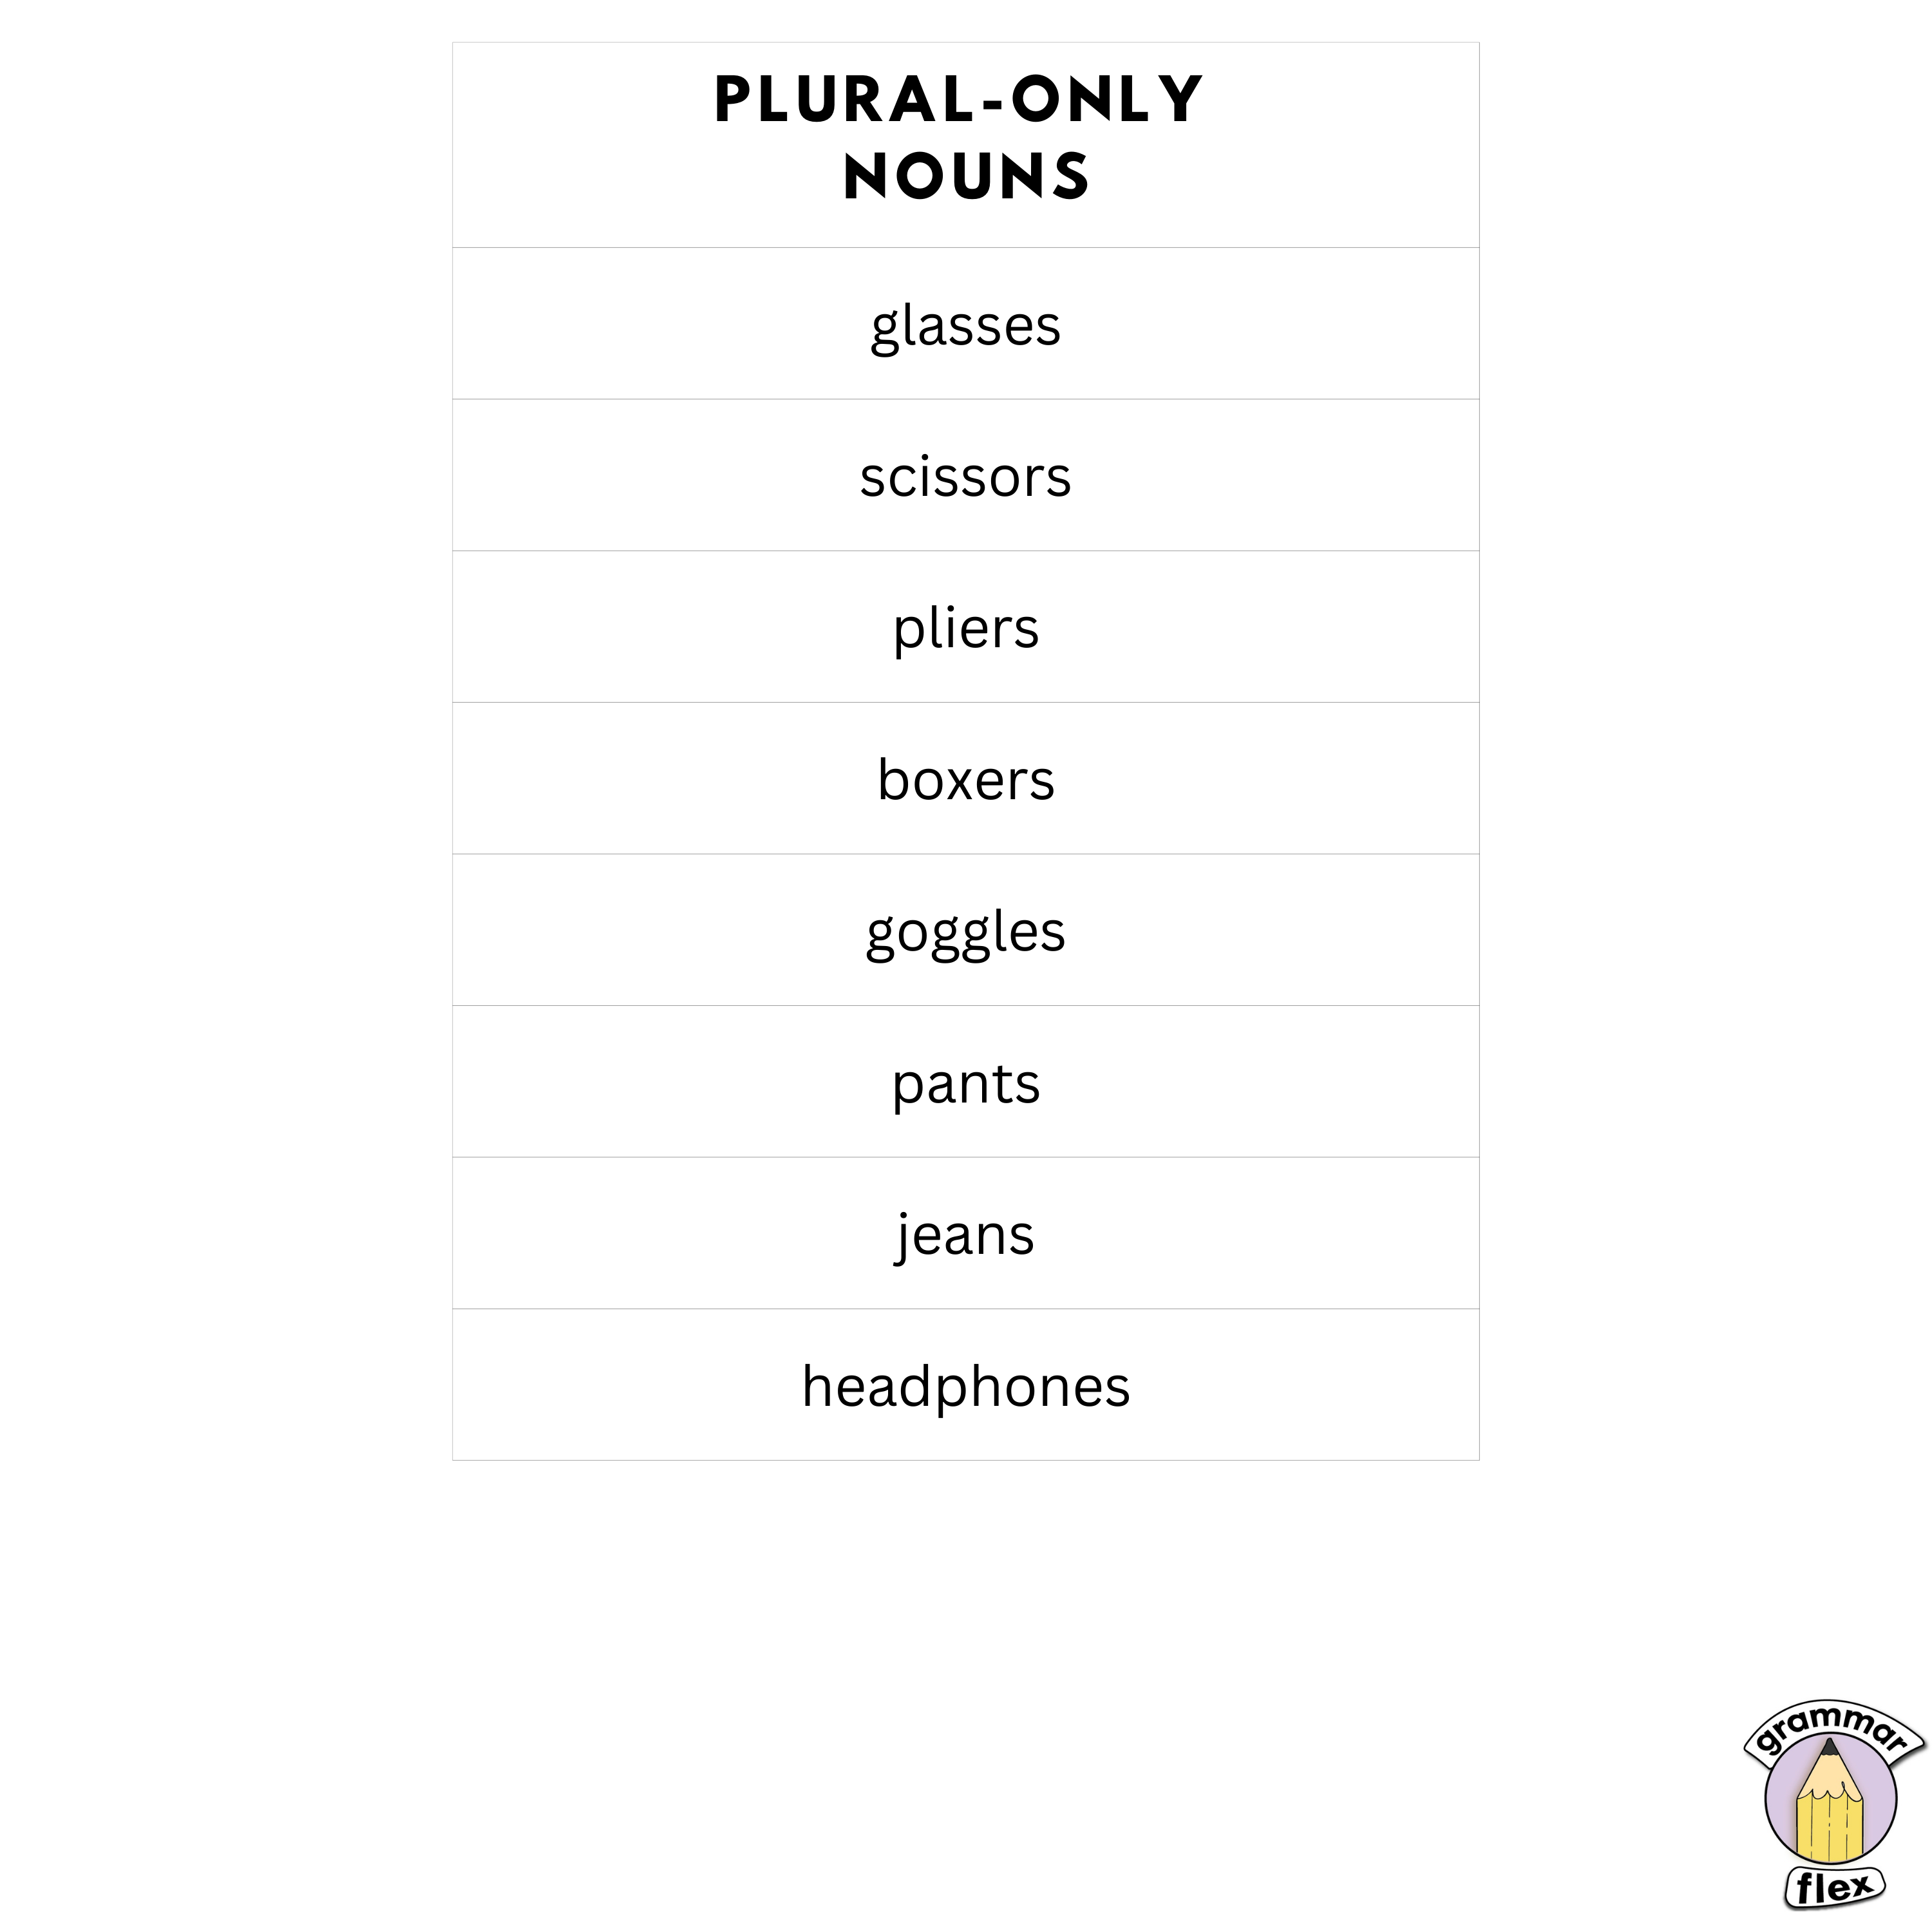 Plural-Only Nouns Chart. By Gflex on Canva.